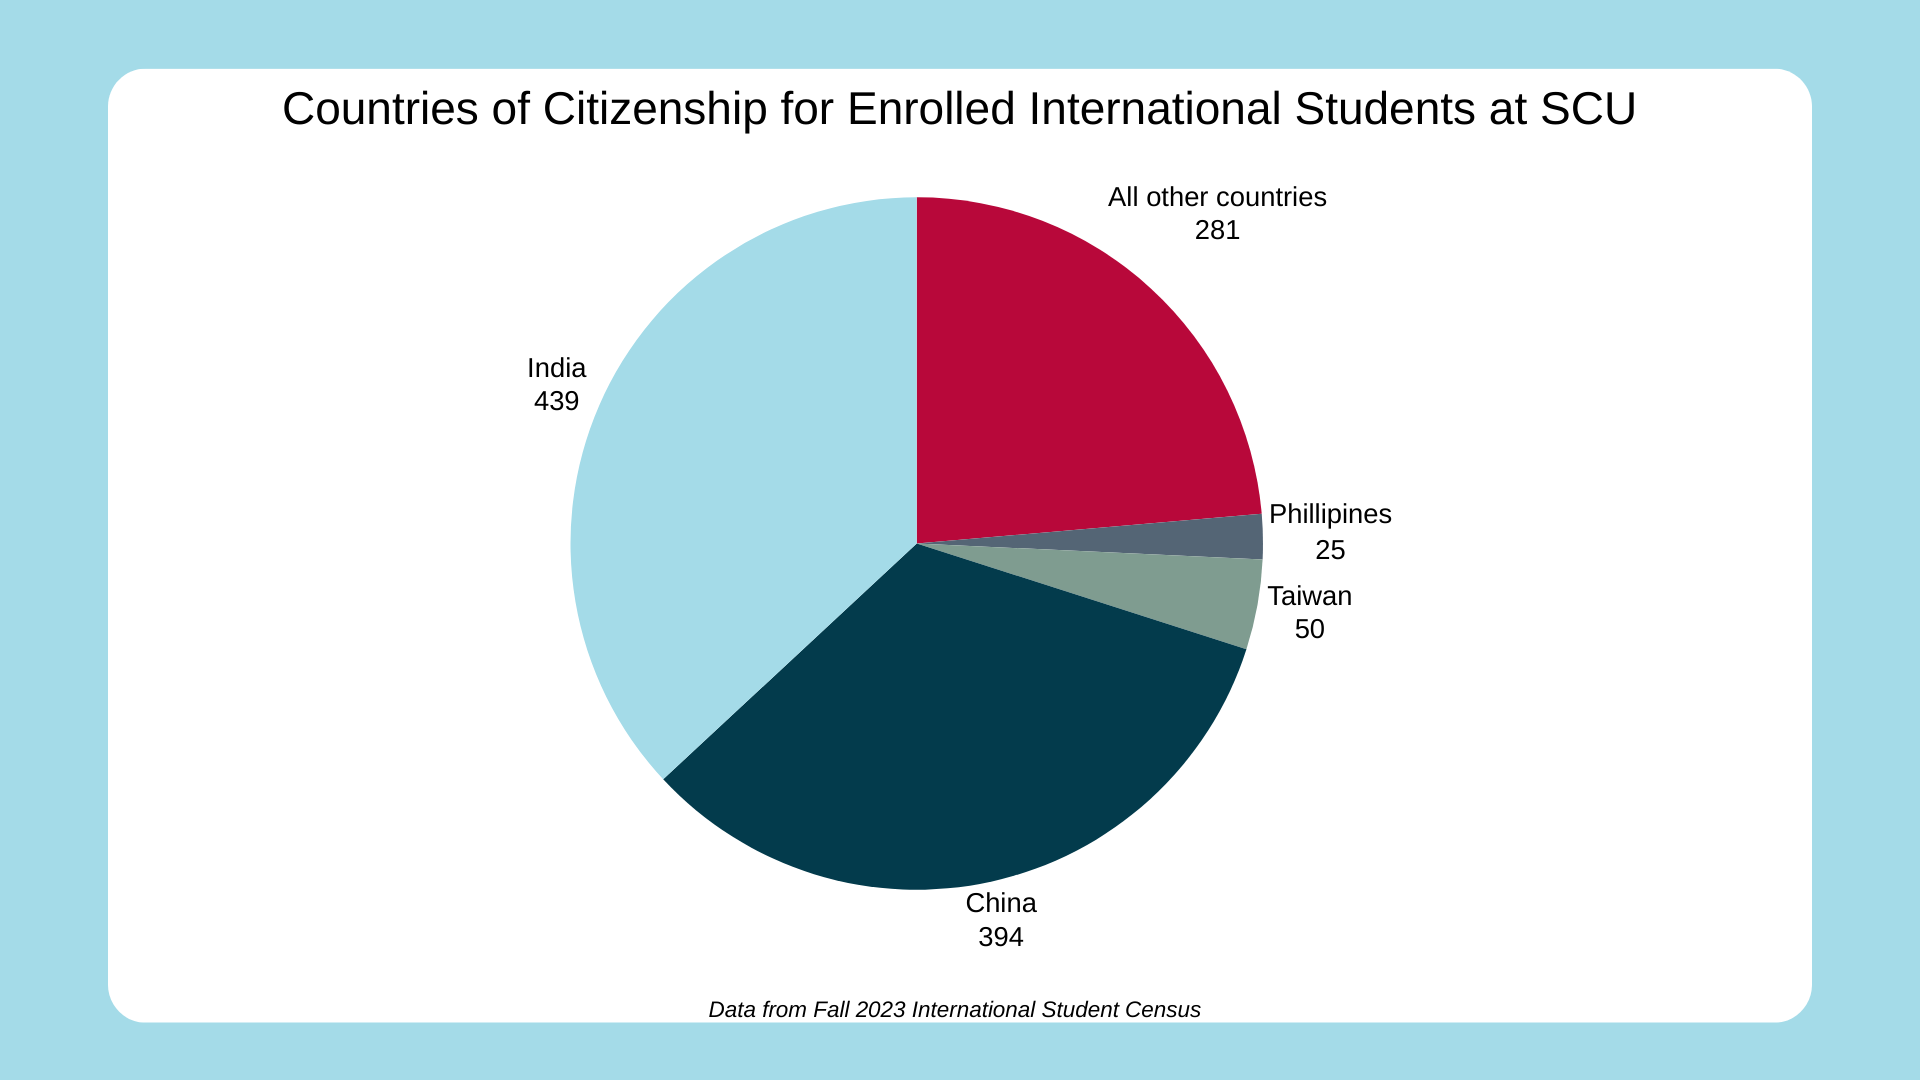 Countries of Citizenship for Enrolled International Students pie chart; 439 from India, 394 from China, 50 from Taiwan, 25 from Philippines, and 281 from all other countries; Data from Fall 2023 International Student Census